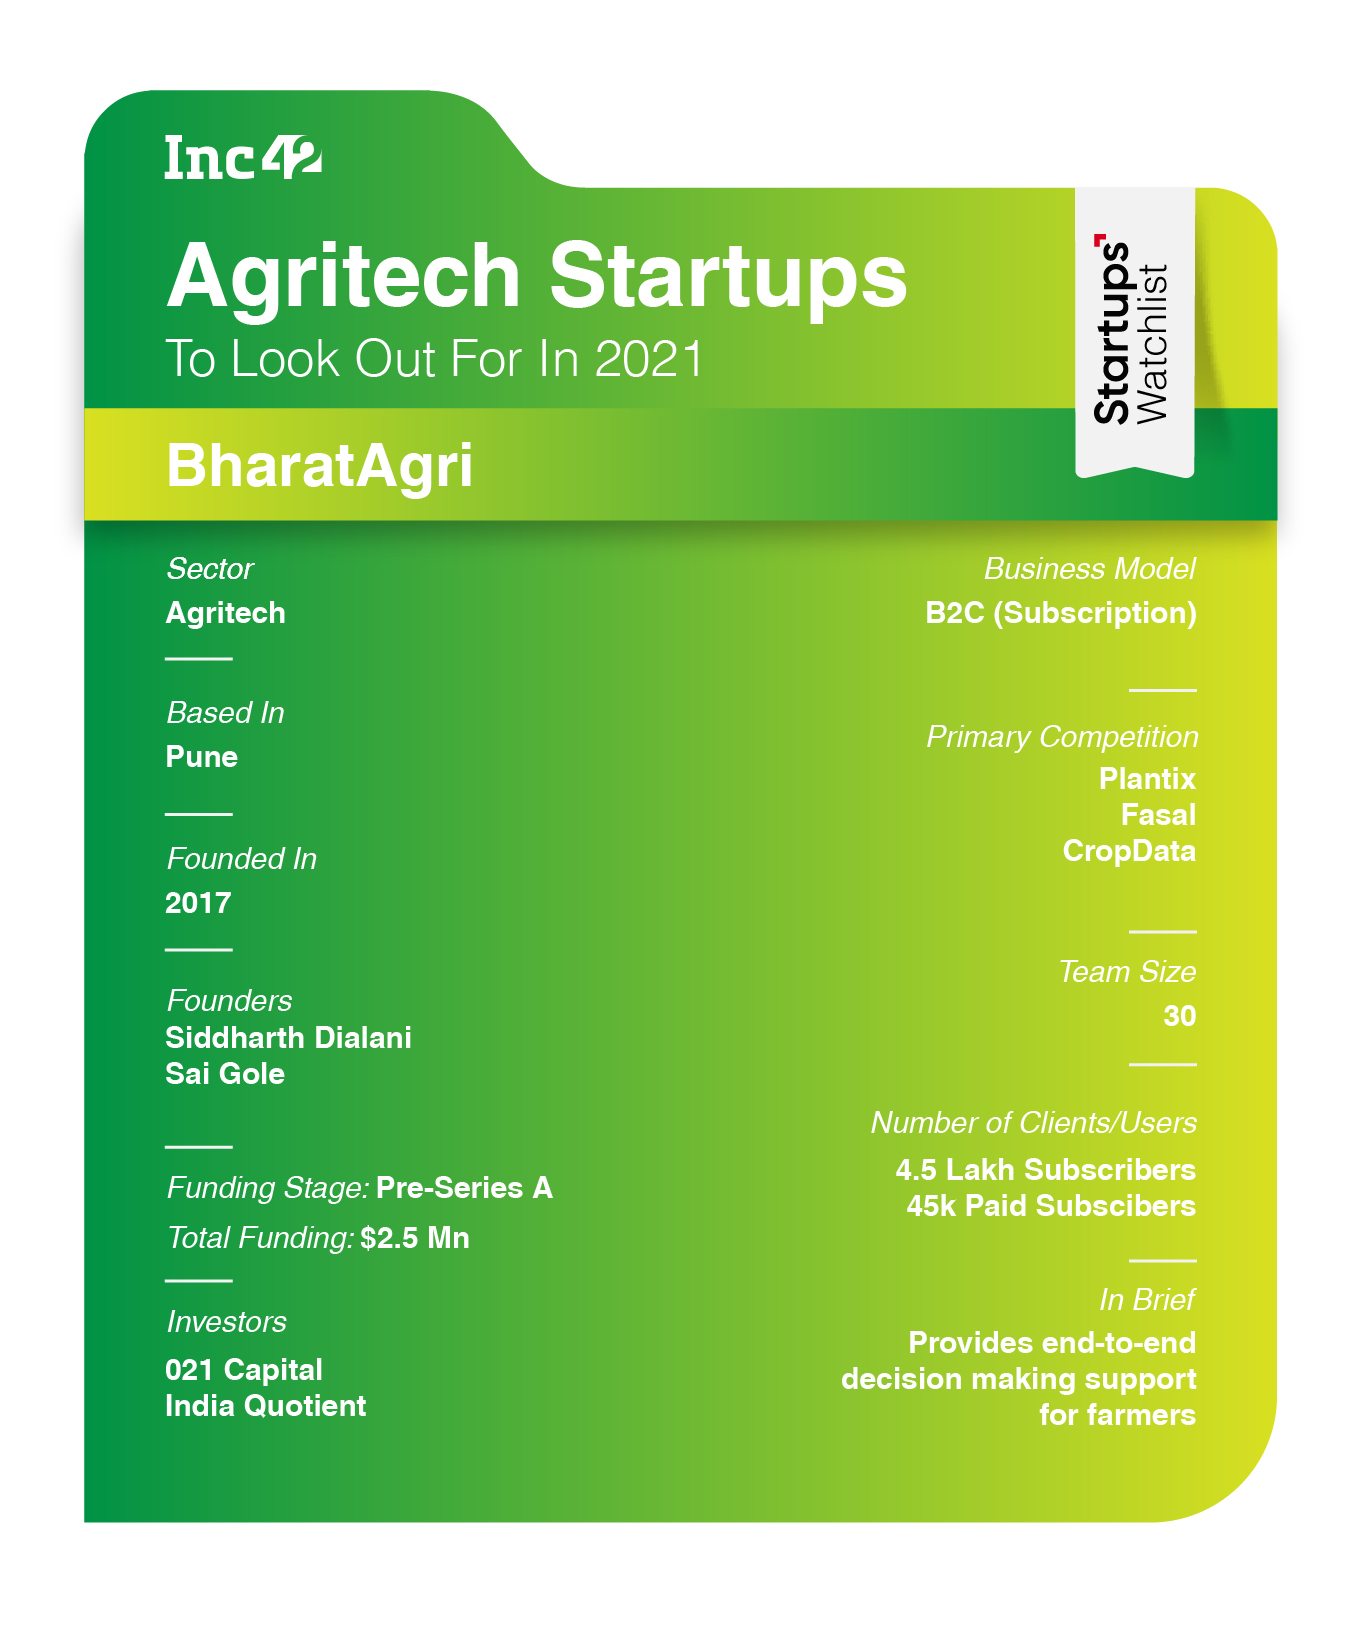 BharatAgri: Leverages Data Science To Provide Personalized Advisory To Farmers  